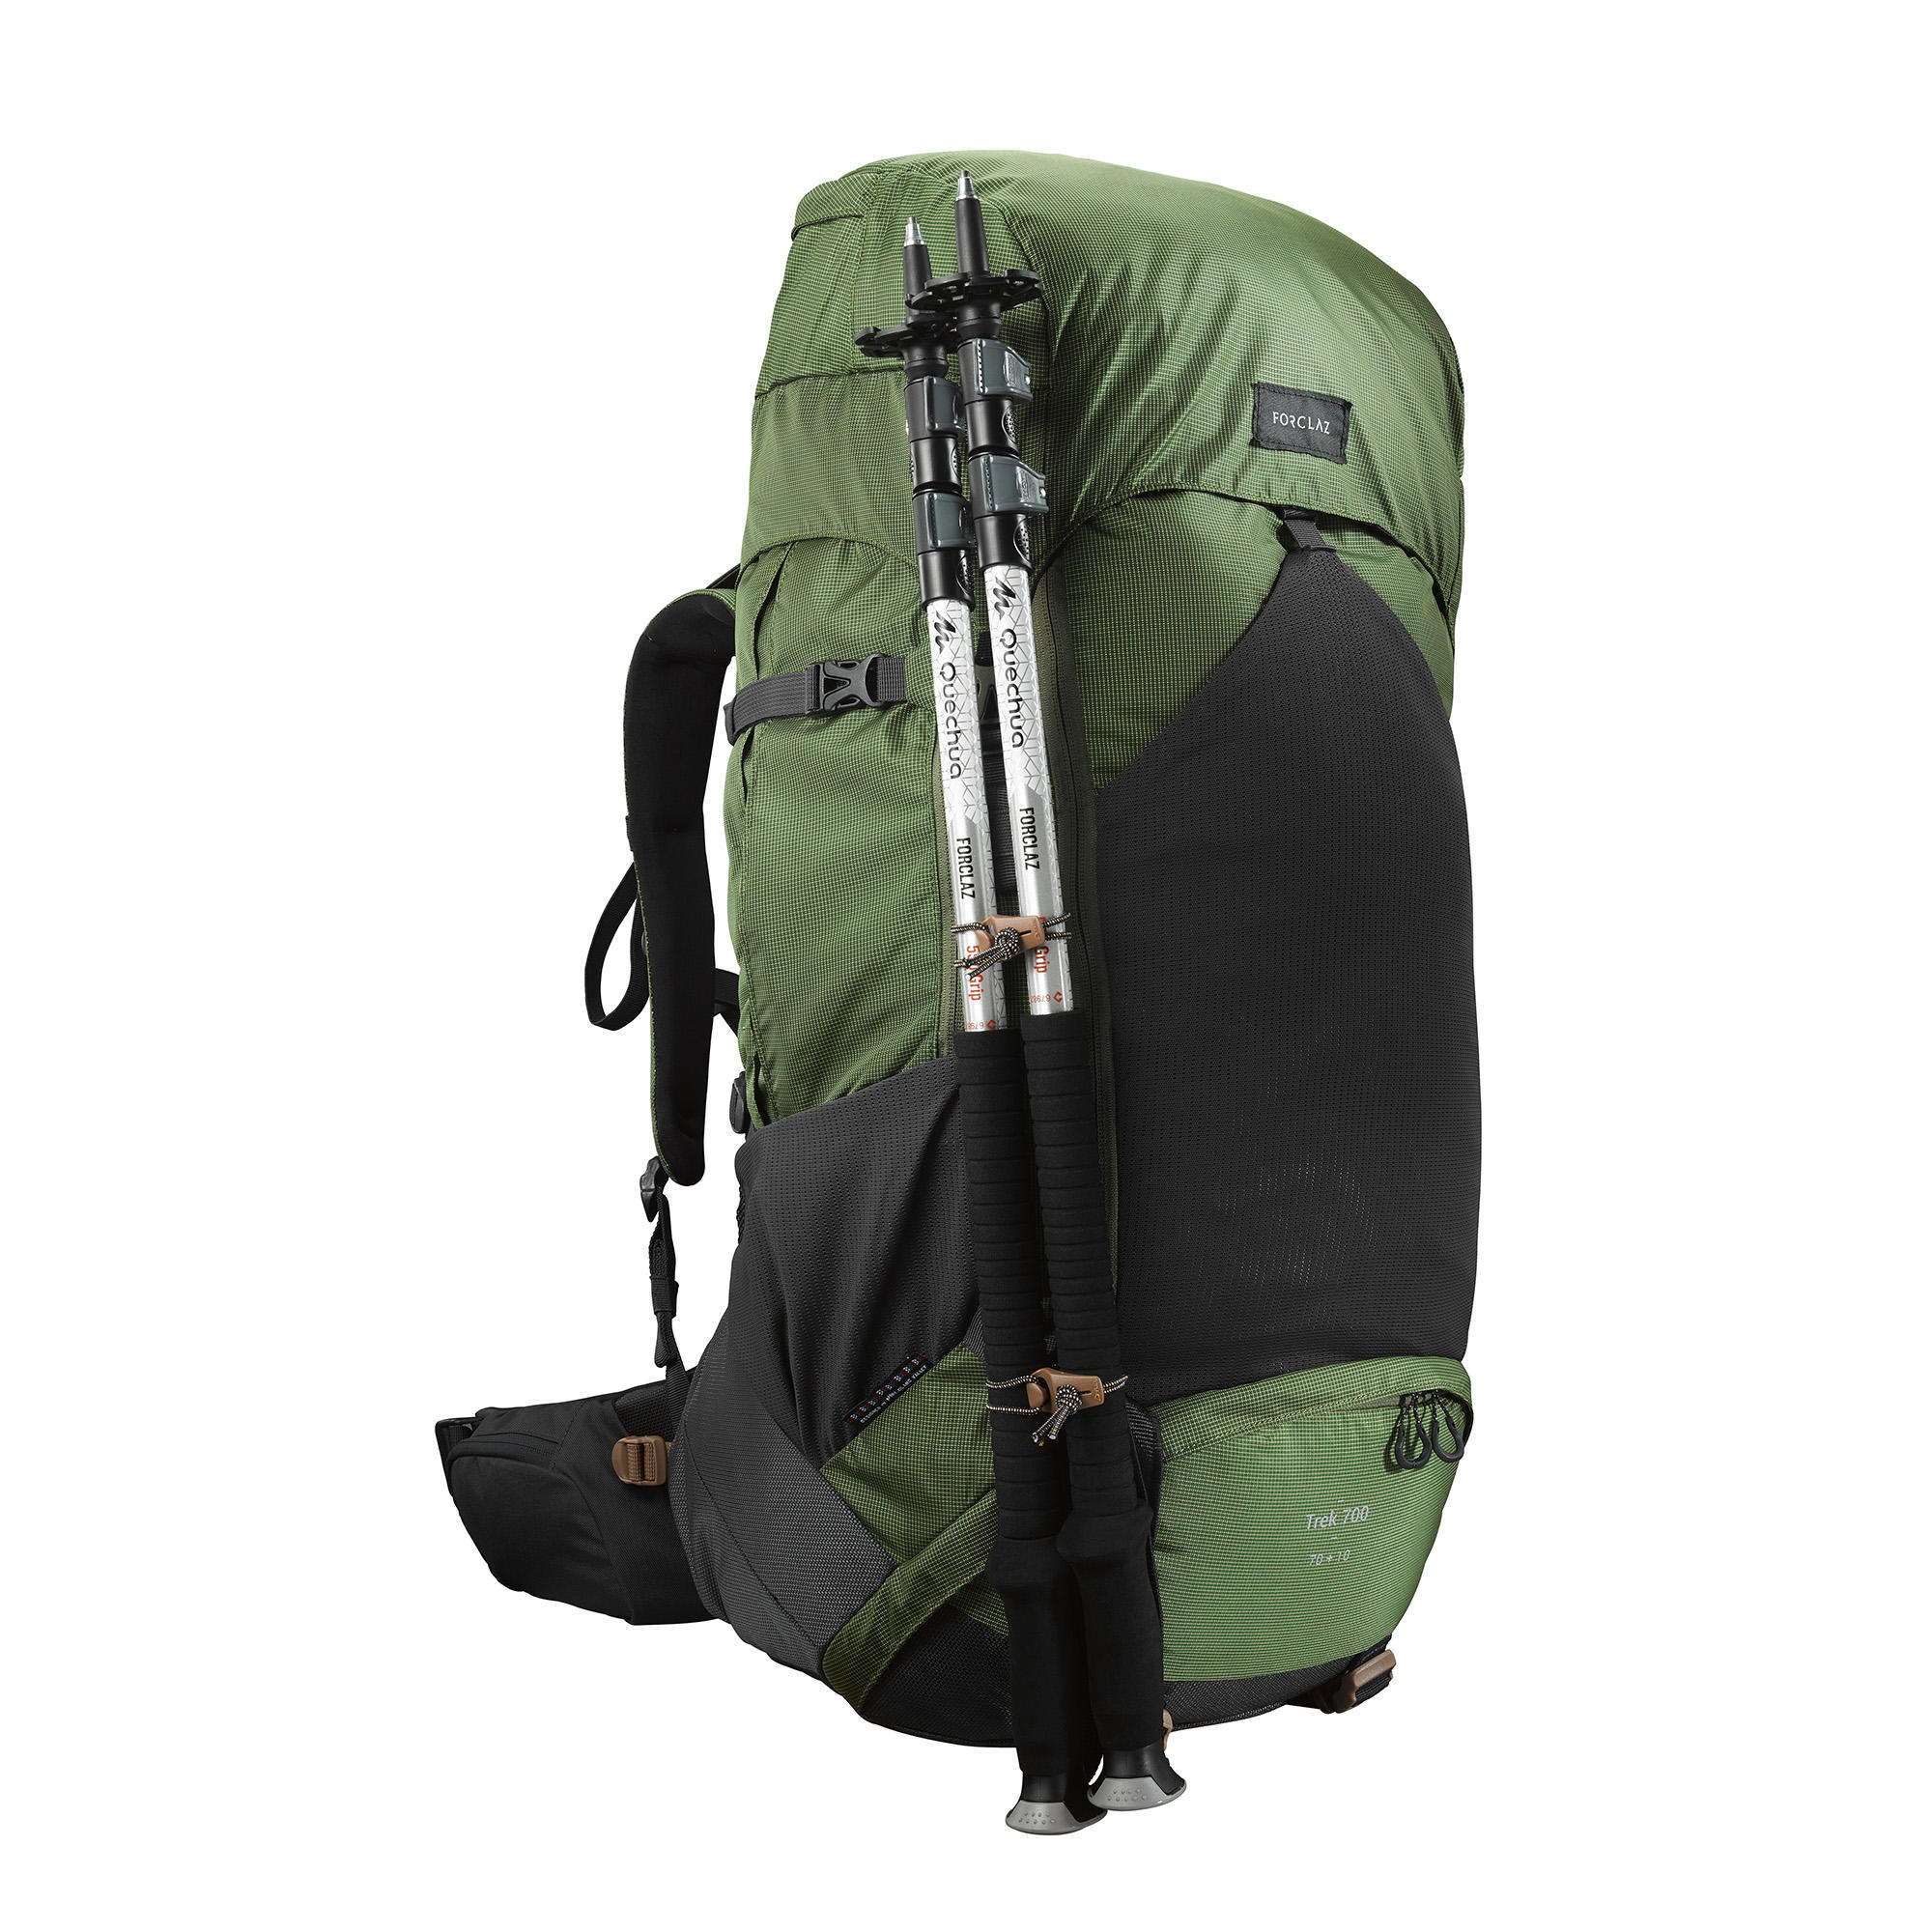 Advent Guess Admirable Sac à Dos Decathlon 70l Forclaz Factory Sale, 55% OFF |  www.smokymountains.org